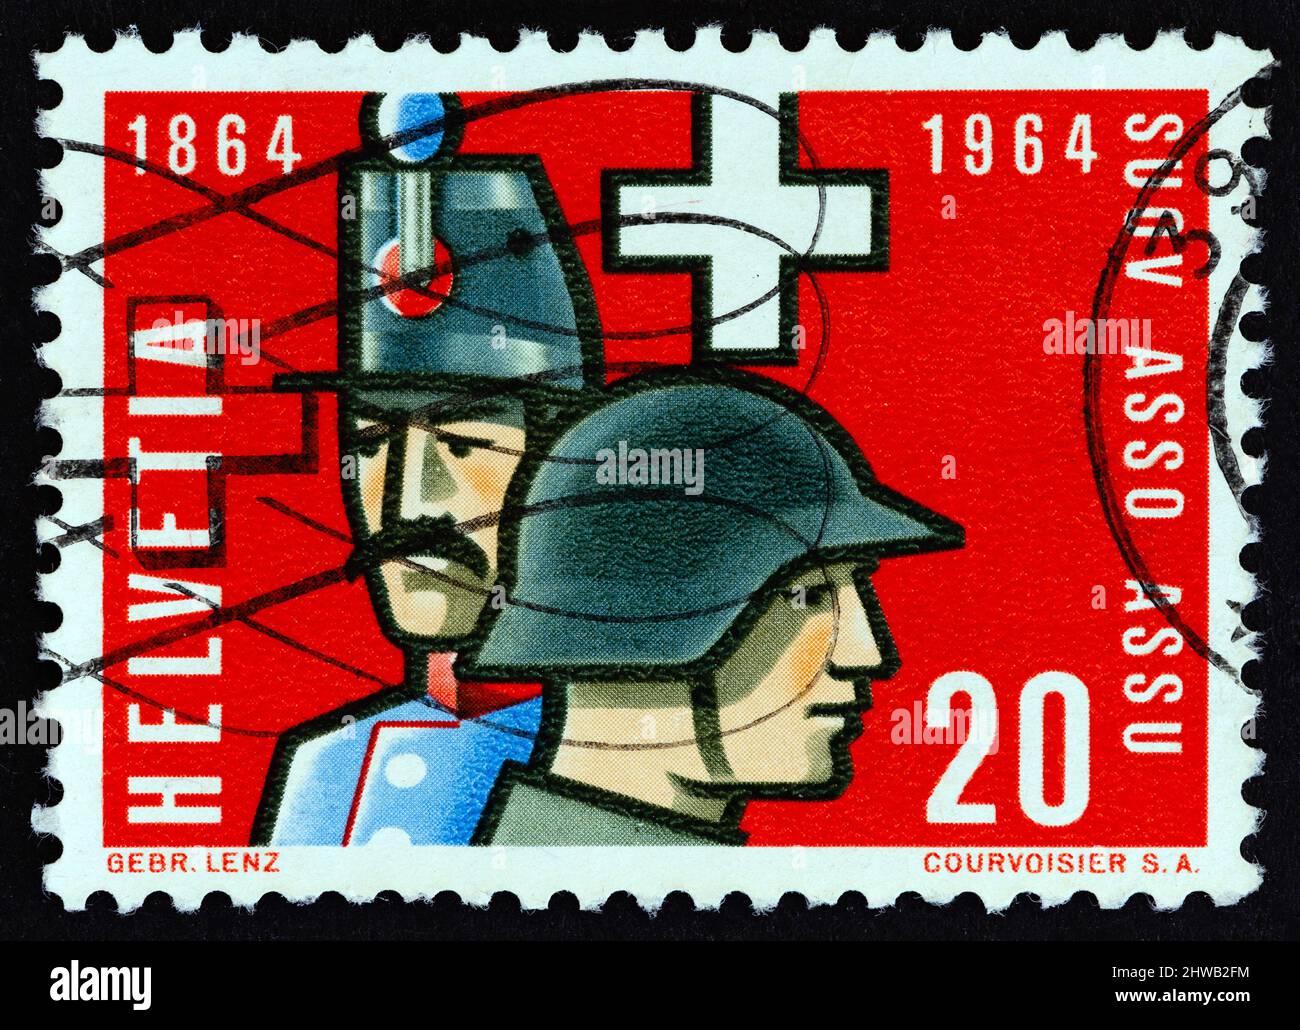 SWITZERLAND - CIRCA 1964: A stamp printed in Switzerland shows Swiss Noncommissioned Officers of 1864 and 1964, circa 1964. Stock Photo